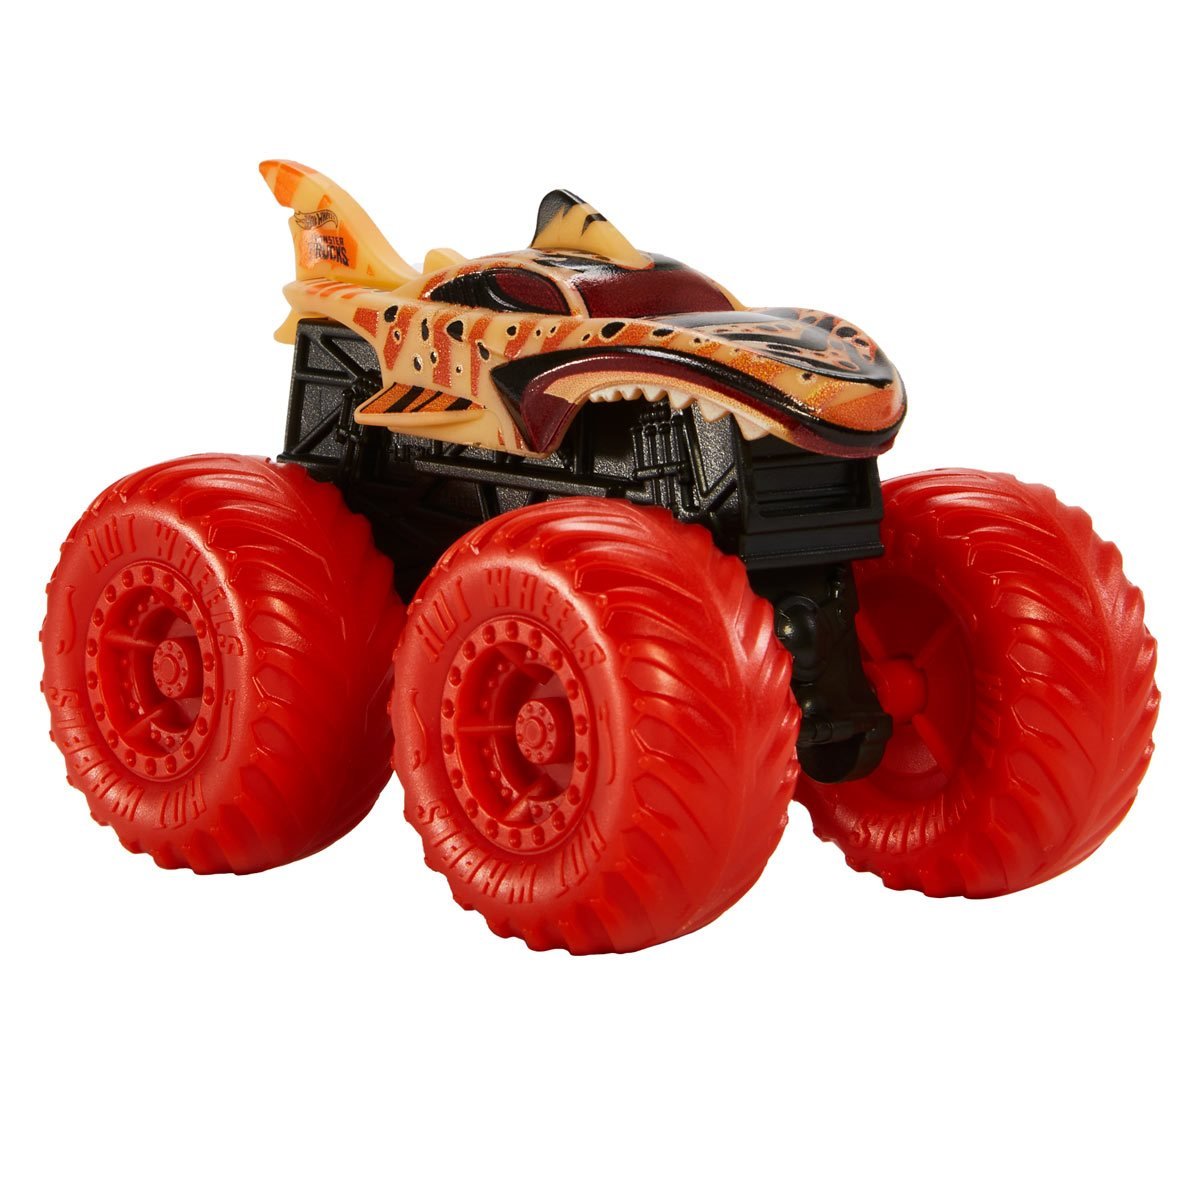 Hot Wheels Monster Trucks Heat Up on the Hottest Courses